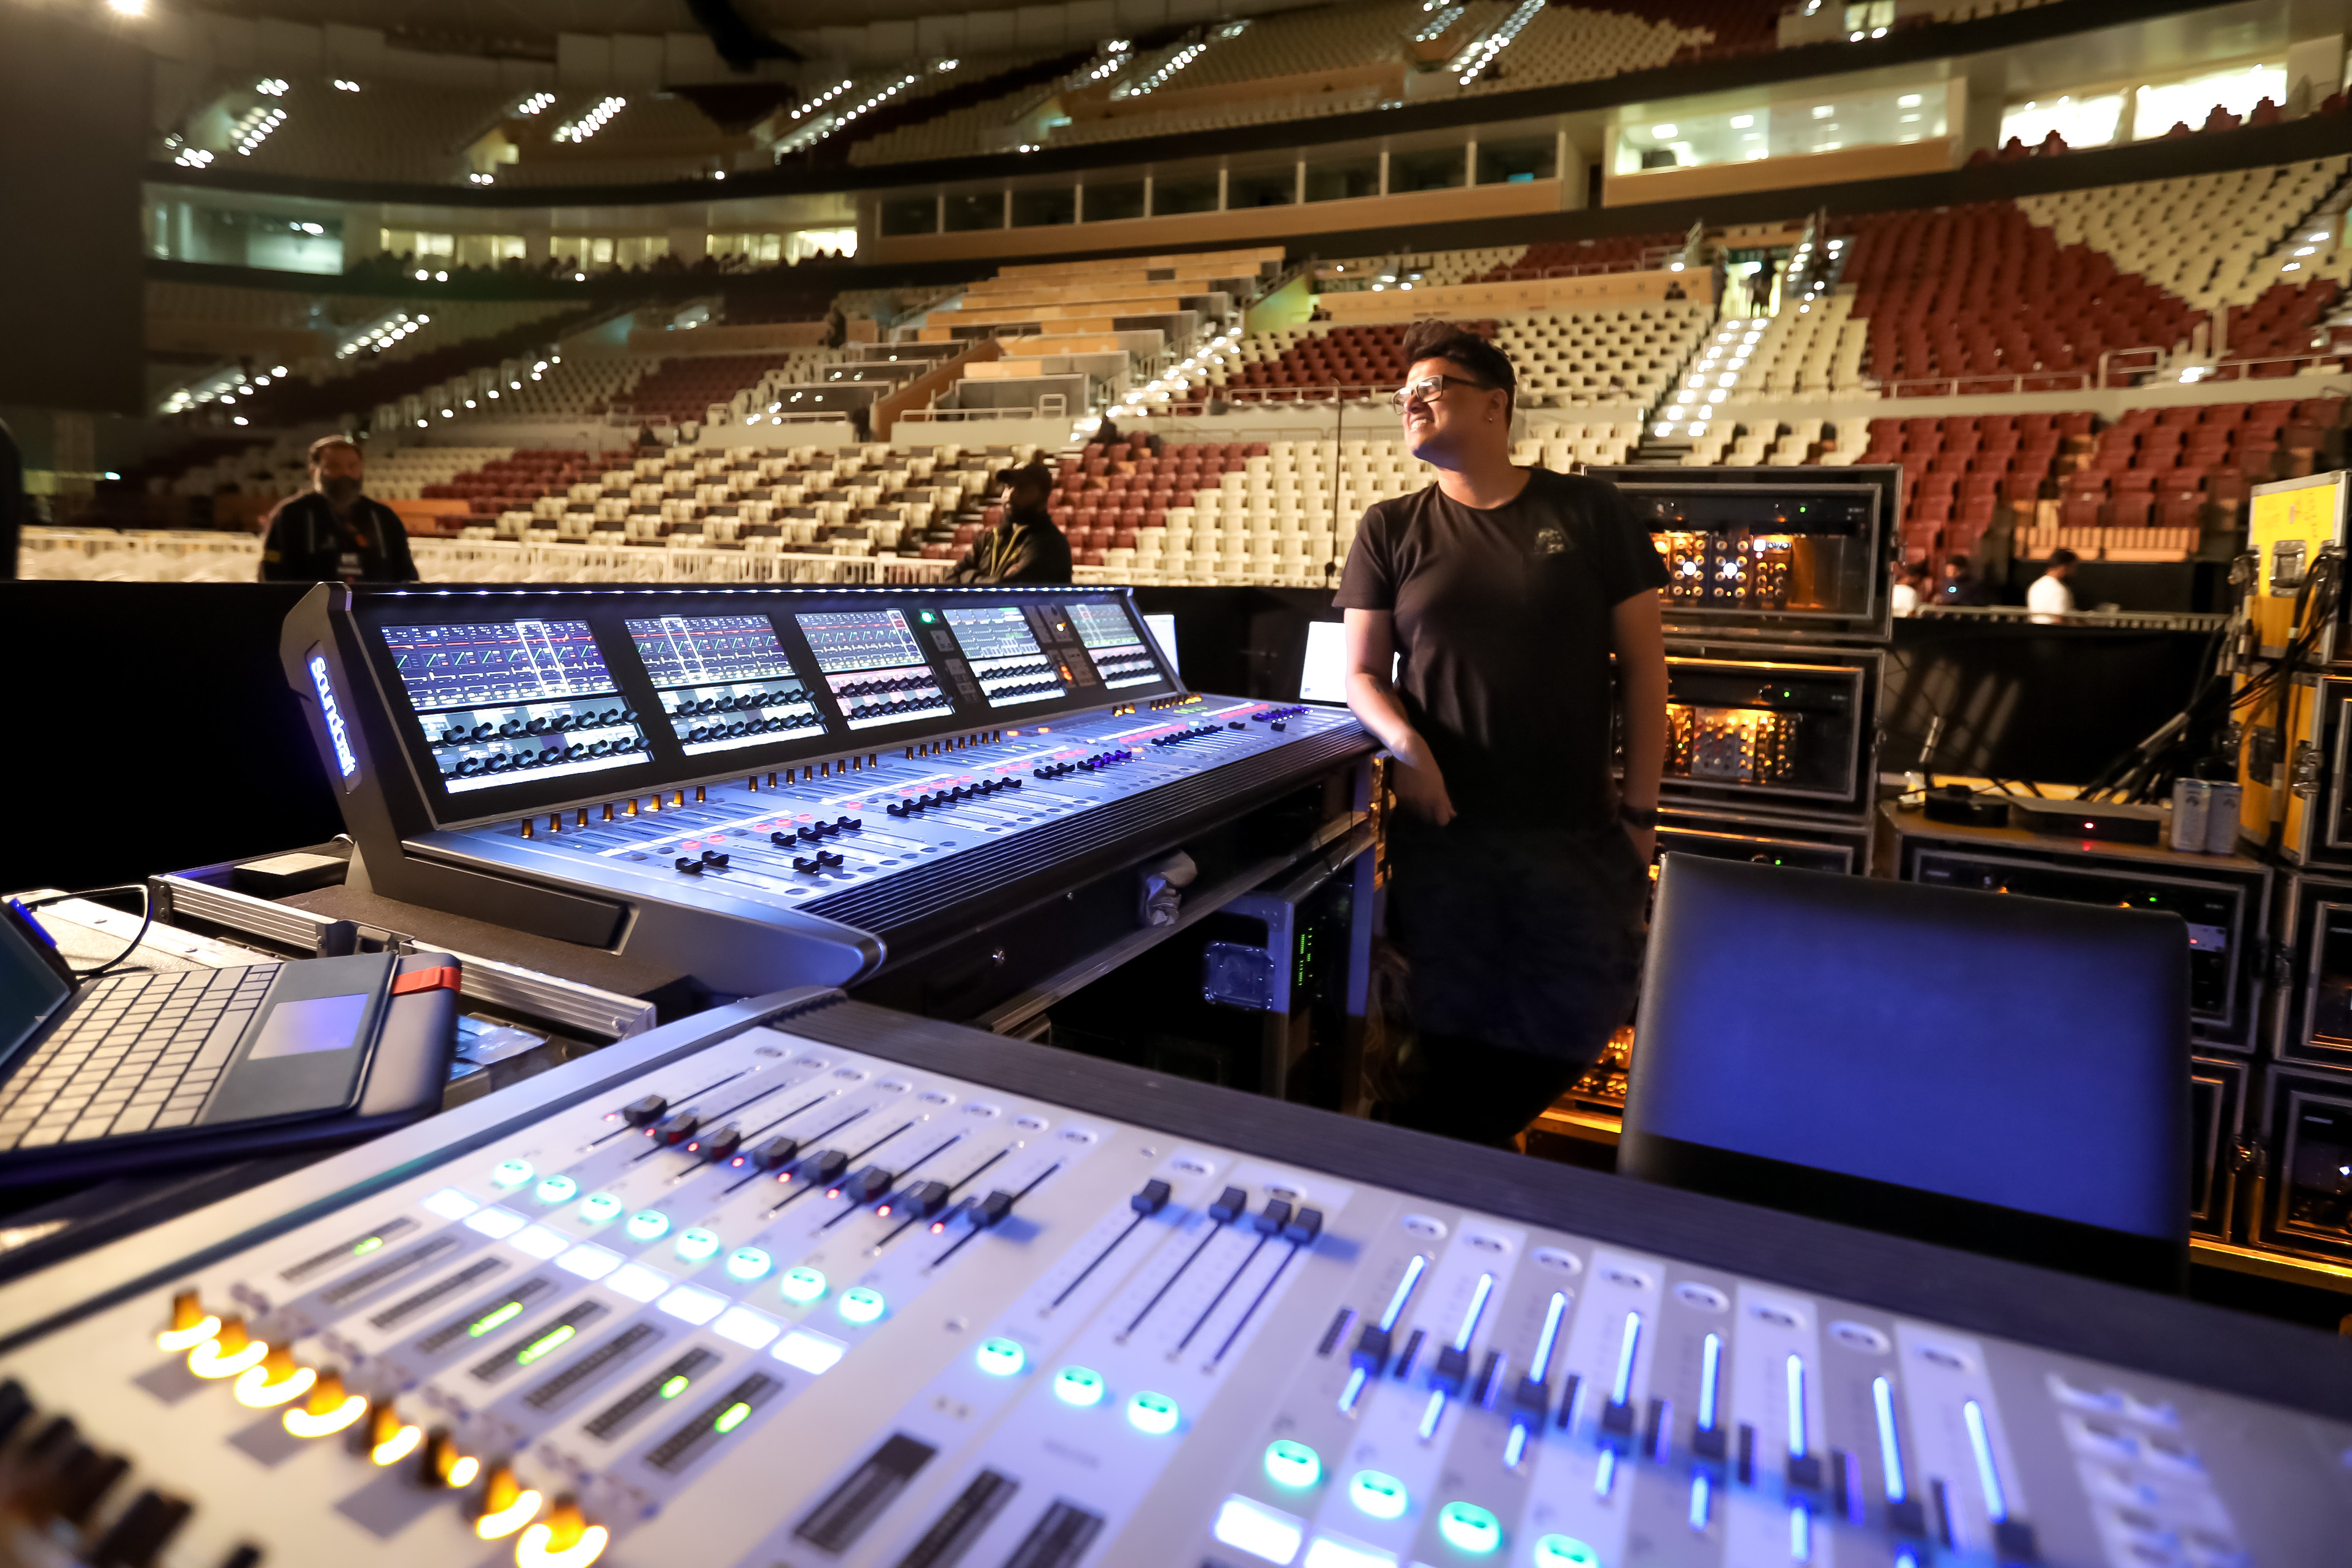 Soundcraft by HARMAN Vi Series Digital Mixing Consoles Lead India’s Pro Audio Industry to New Heights